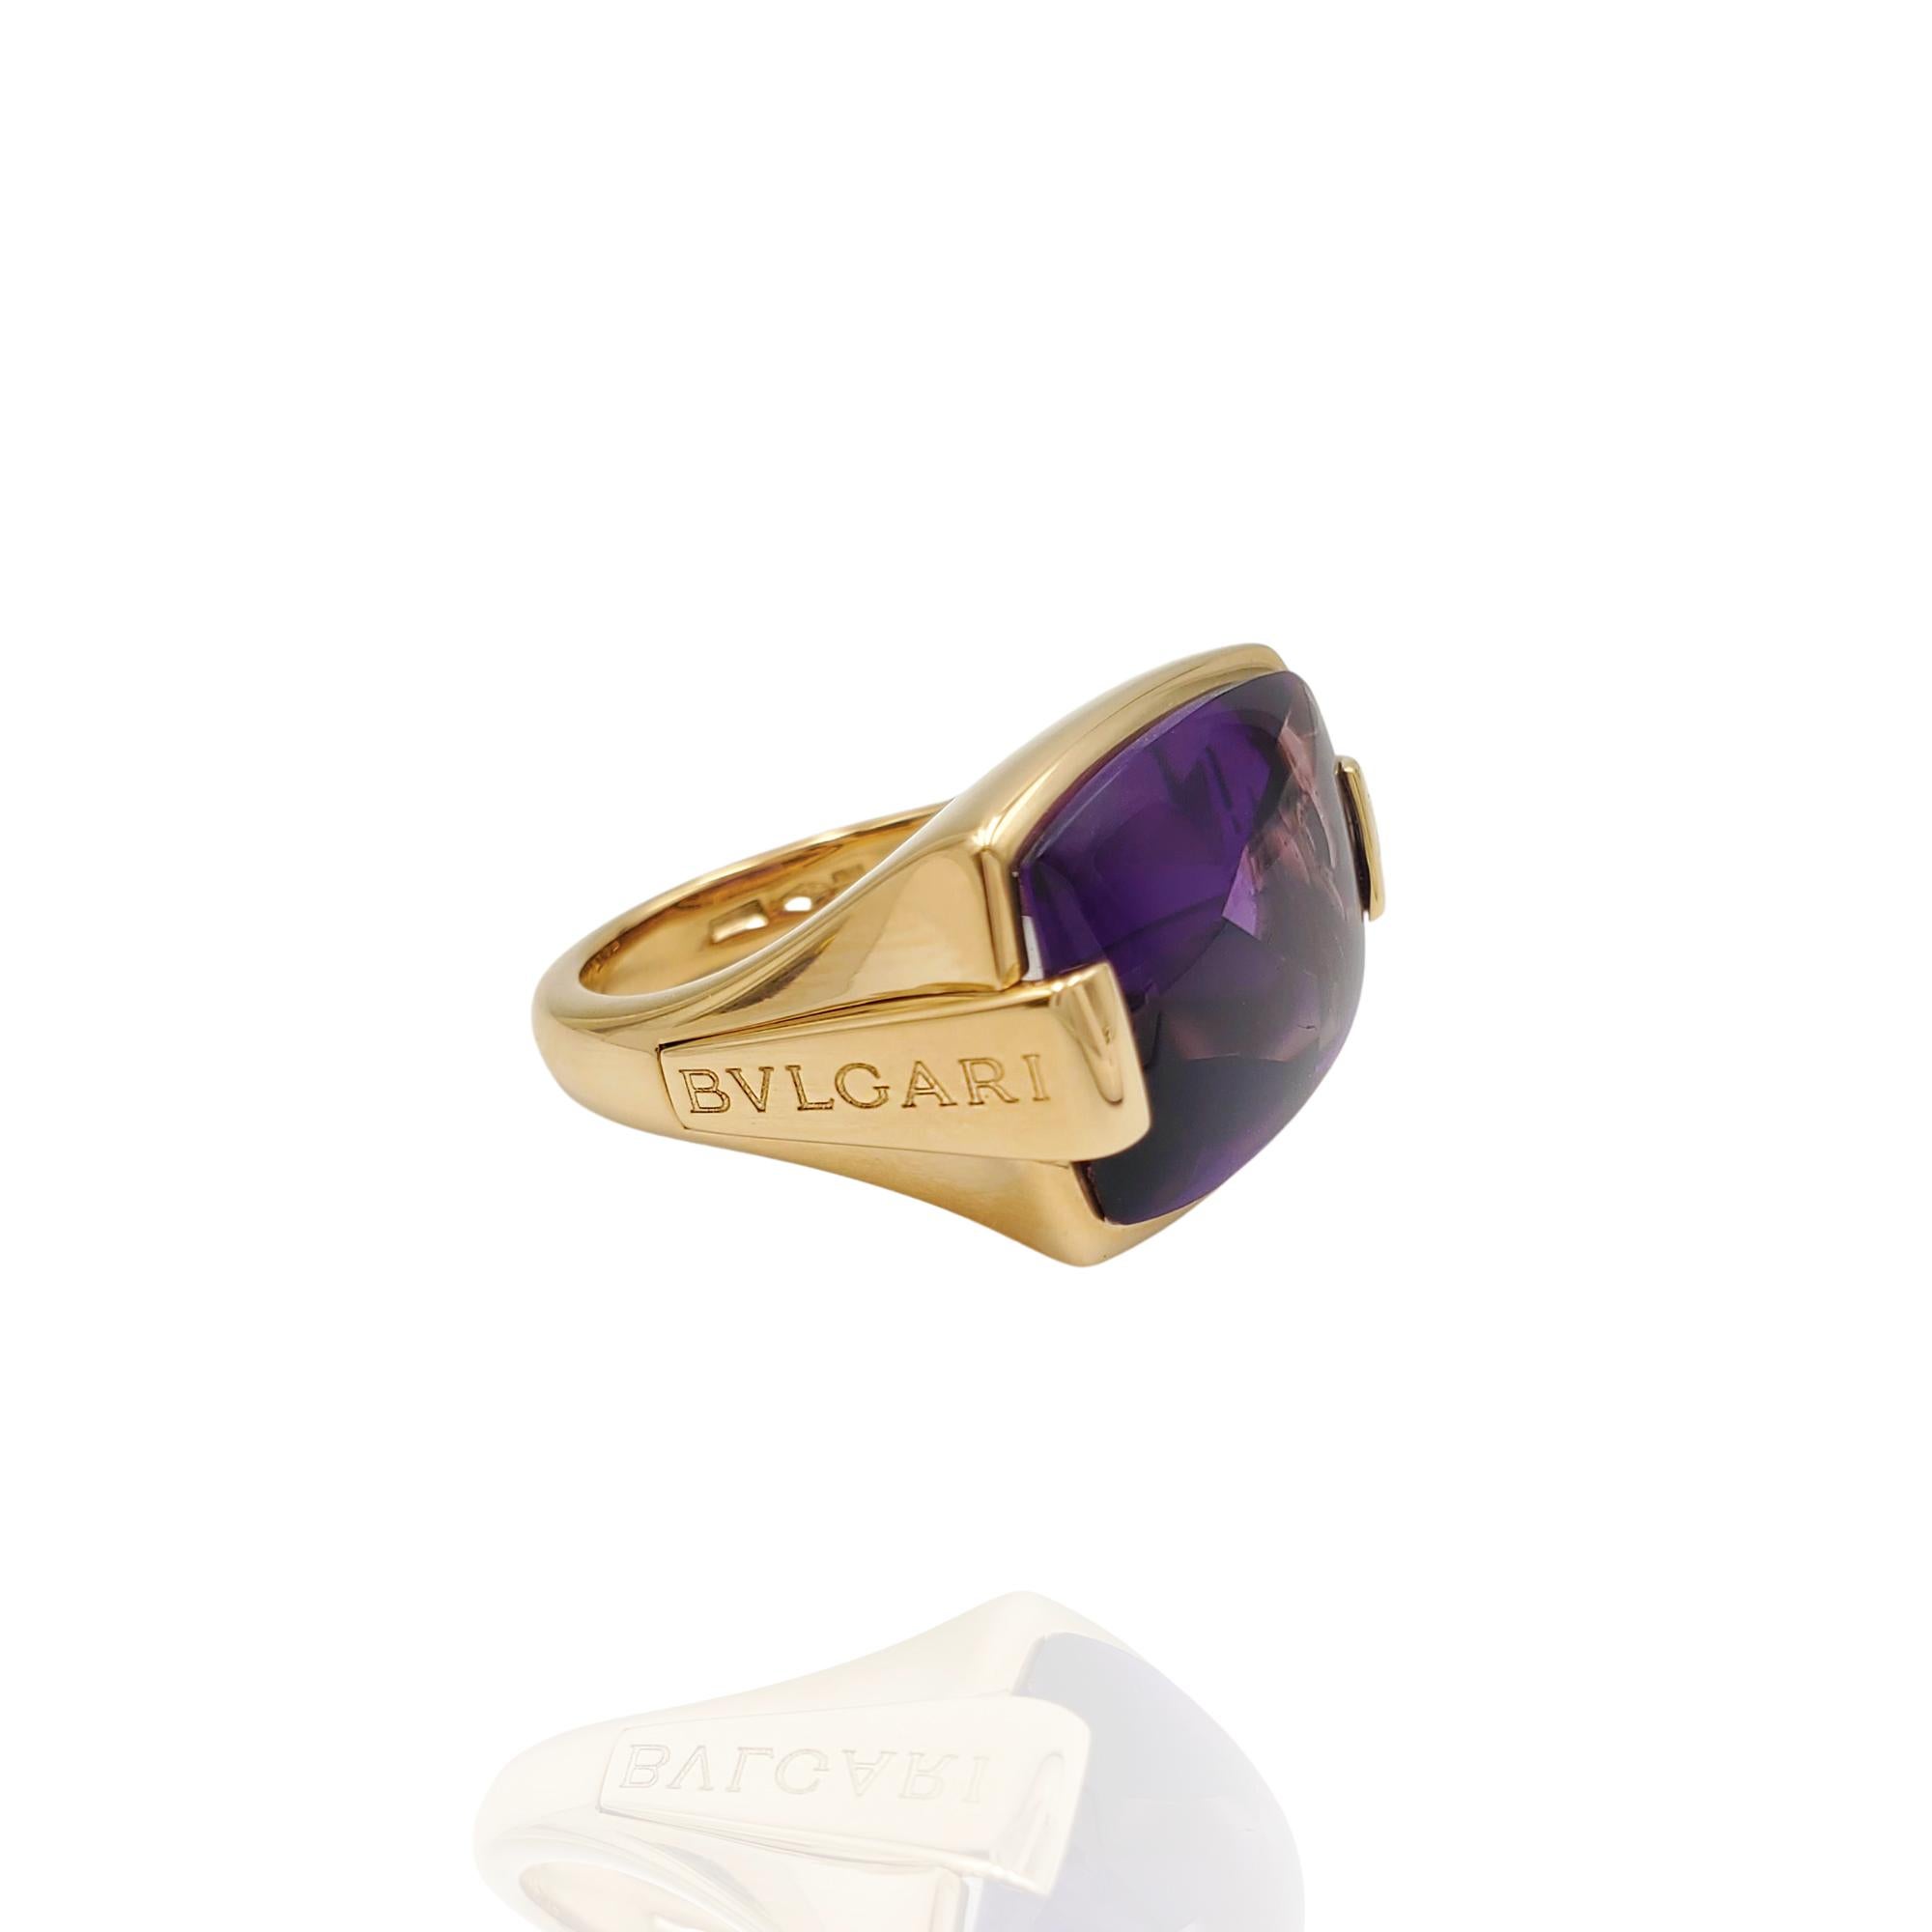 Authentic Bvlgari 'Metropolis' ring crafted in 18 karat yellow gold and centering on a faceted amethyst measuring approximately 15.6mm x 12.5mm.  US size 5.  Signed Bvlgari, Made in Italy, with hallmarks.  Ring is not presented with box or papers. 